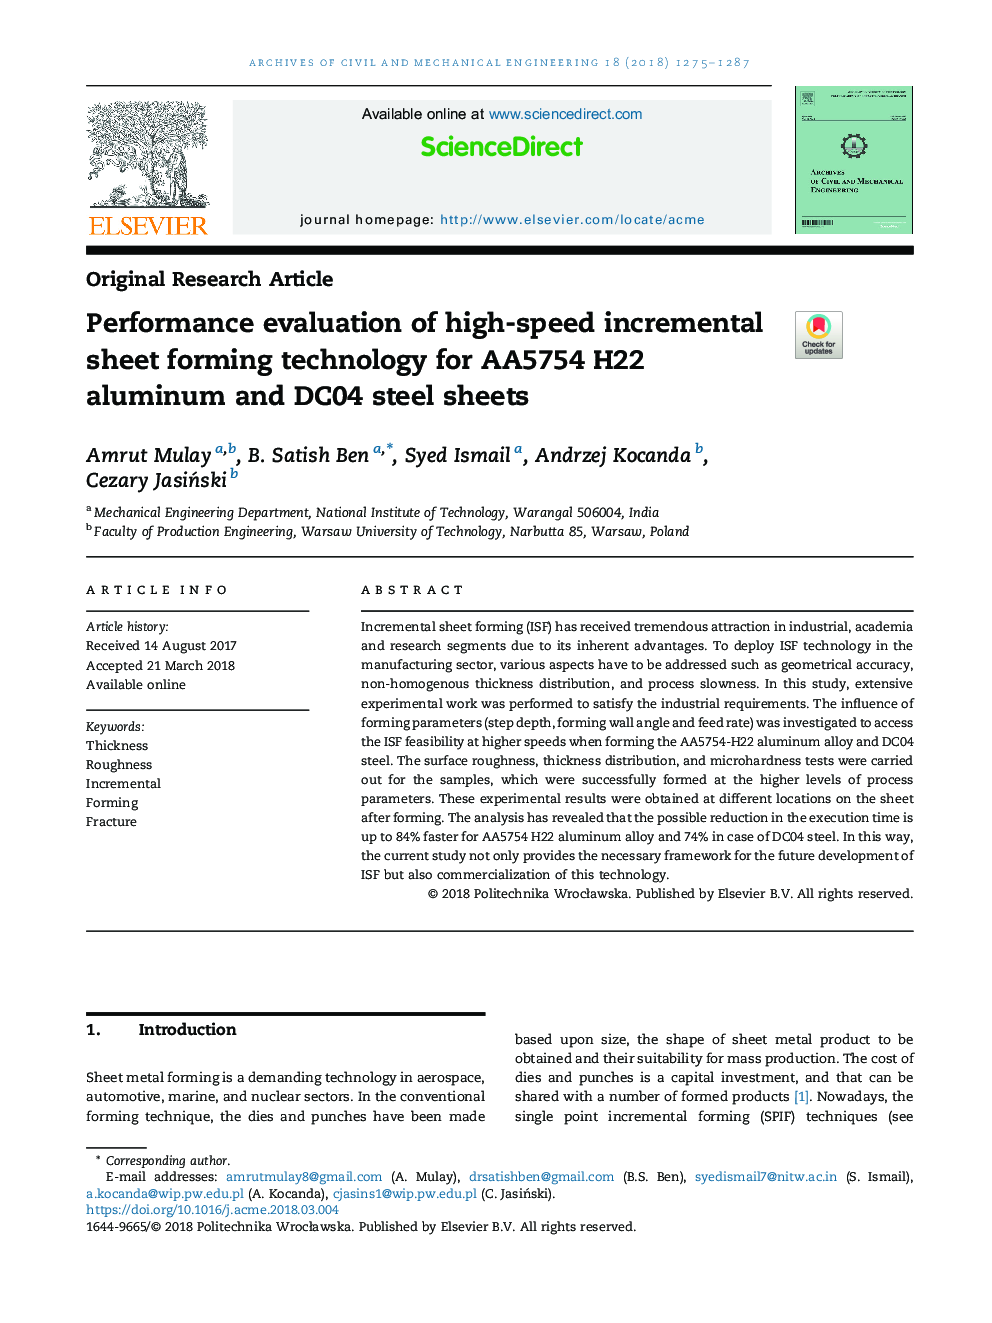 Performance evaluation of high-speed incremental sheet forming technology for AA5754 H22 aluminum and DC04 steel sheets